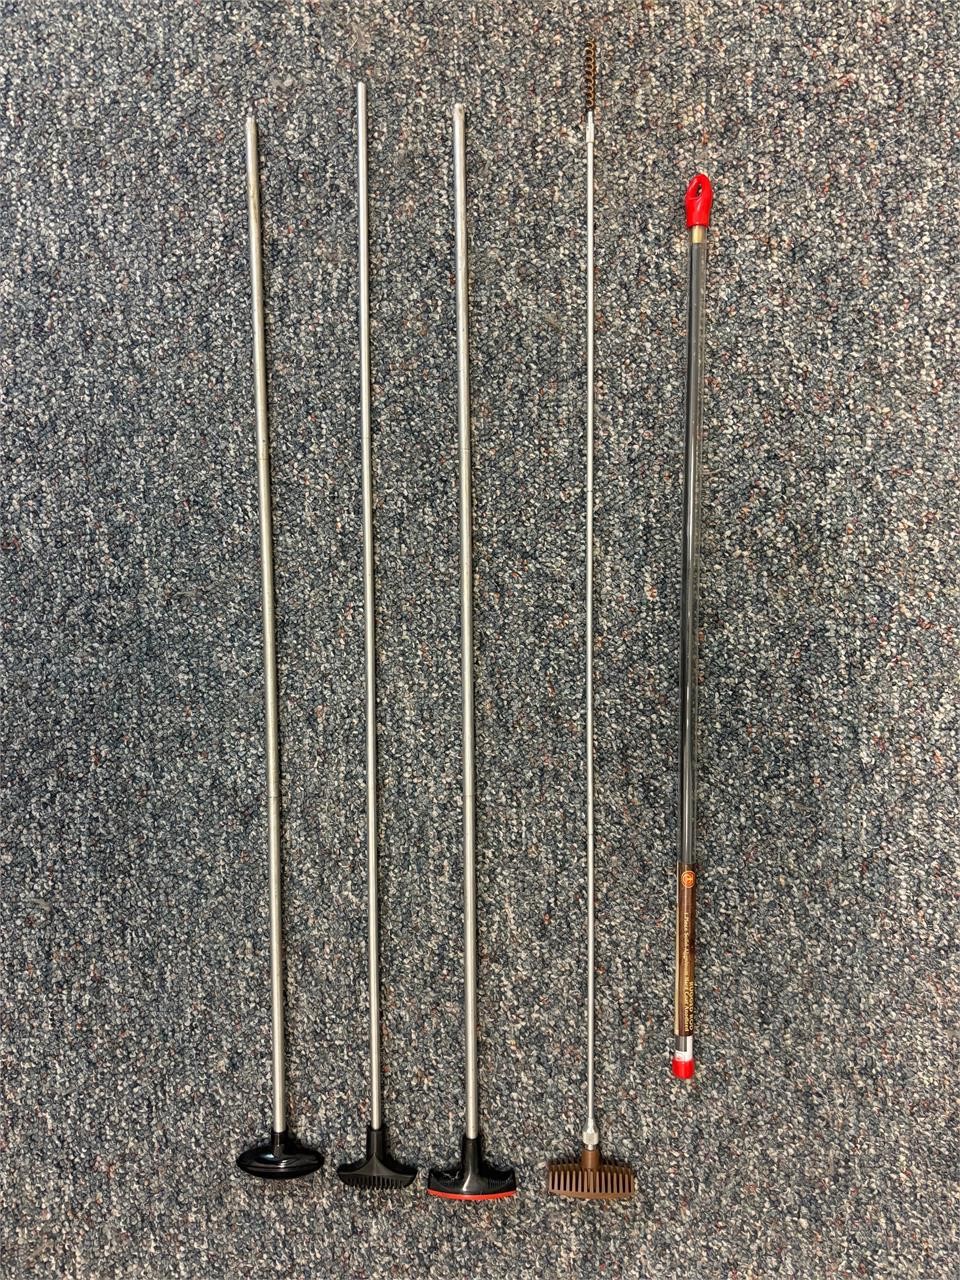 Gun Cleaning Rods